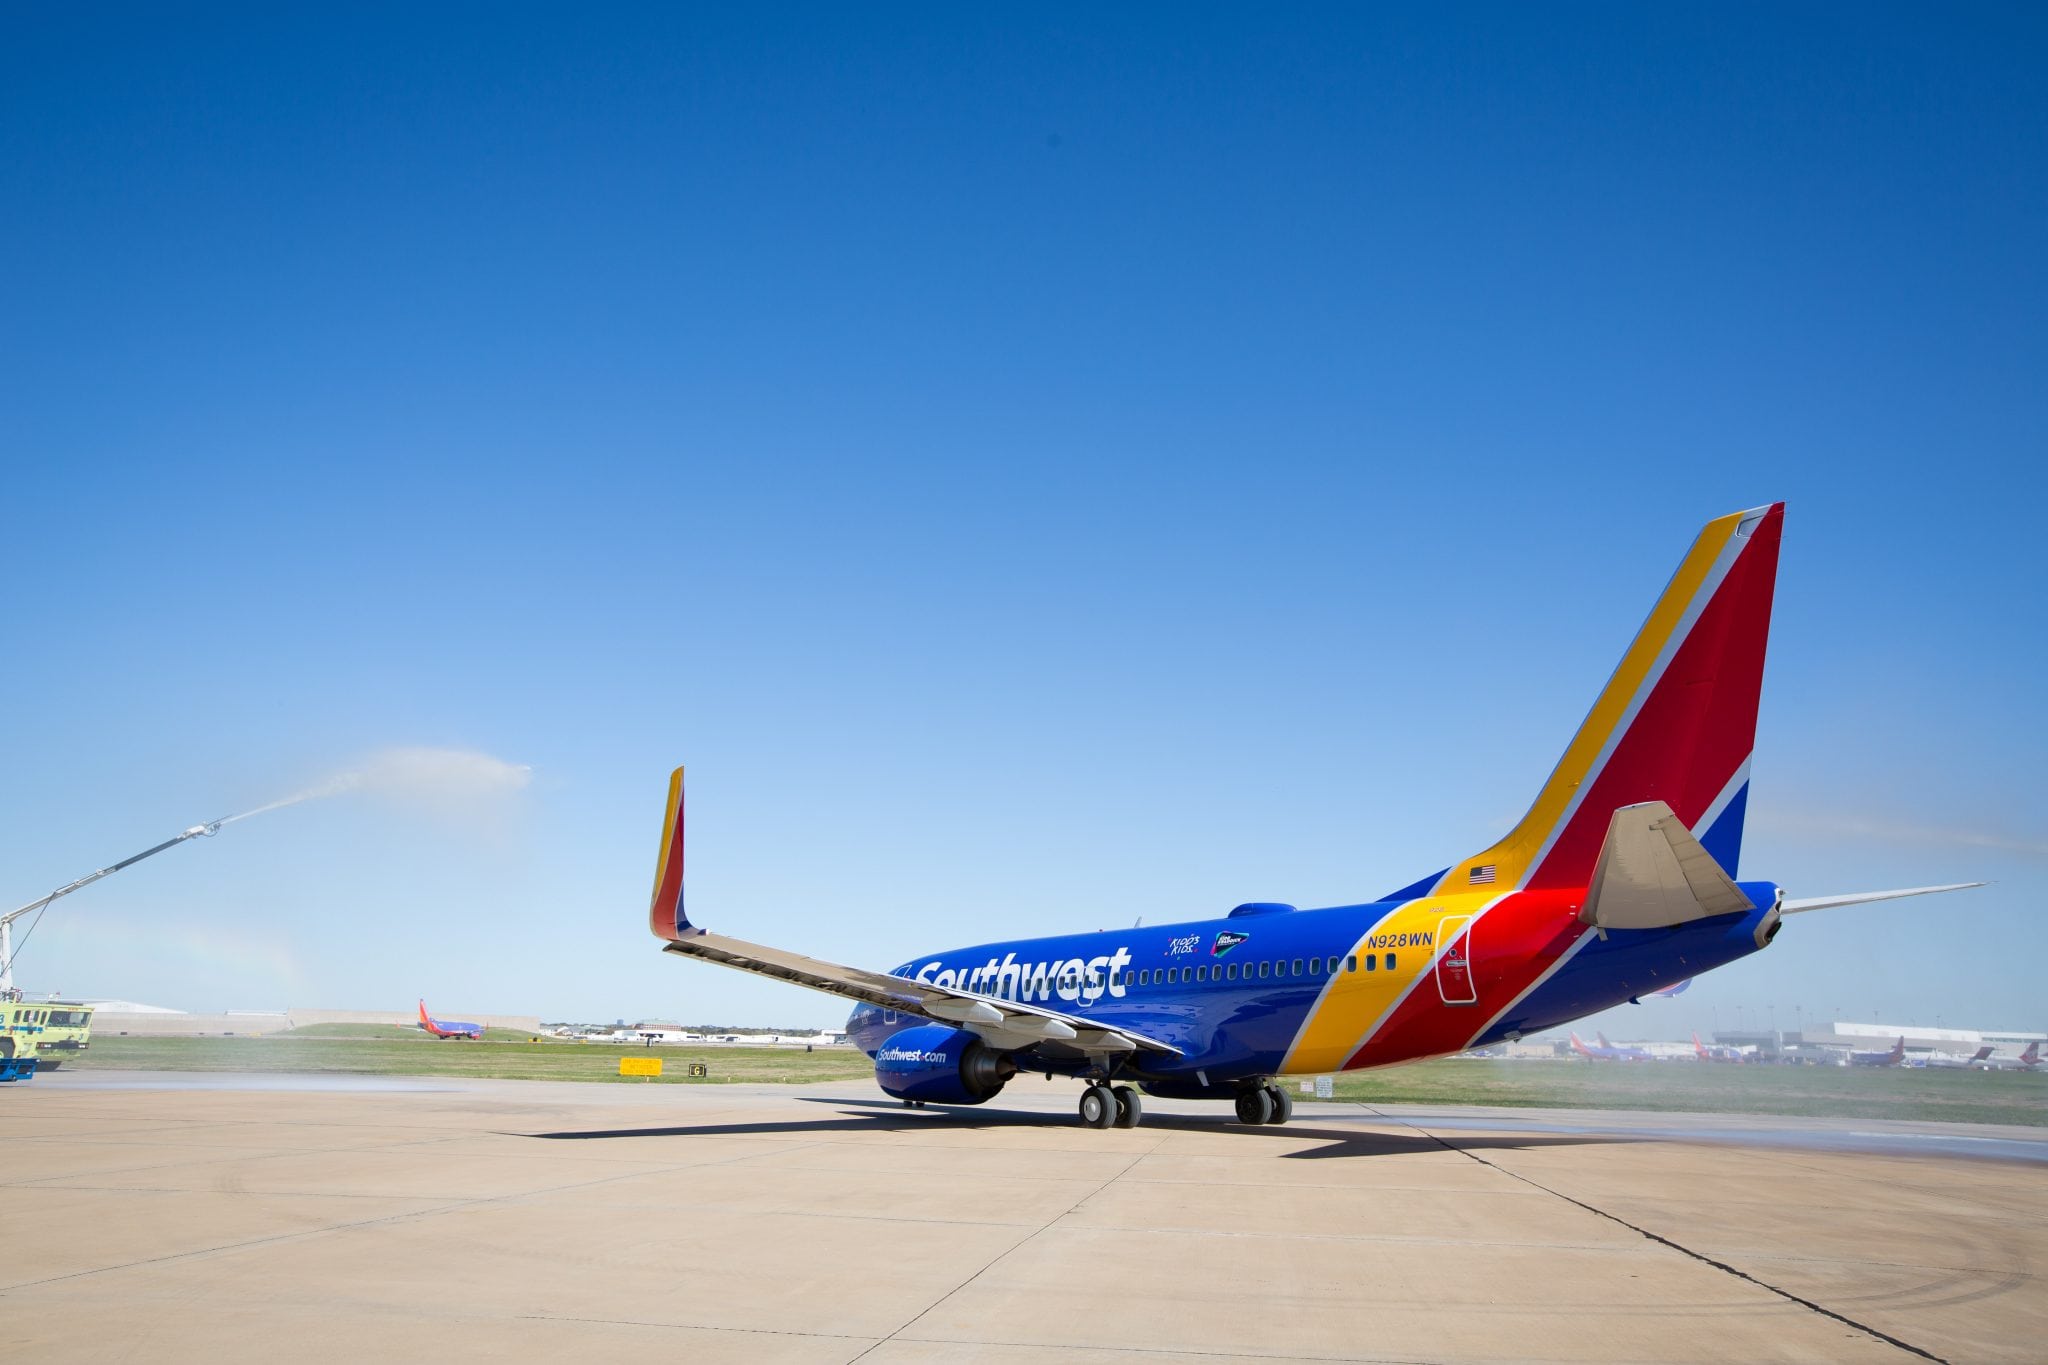 Southwest has canceled hundreds of flights after a technical glitch disrupted service